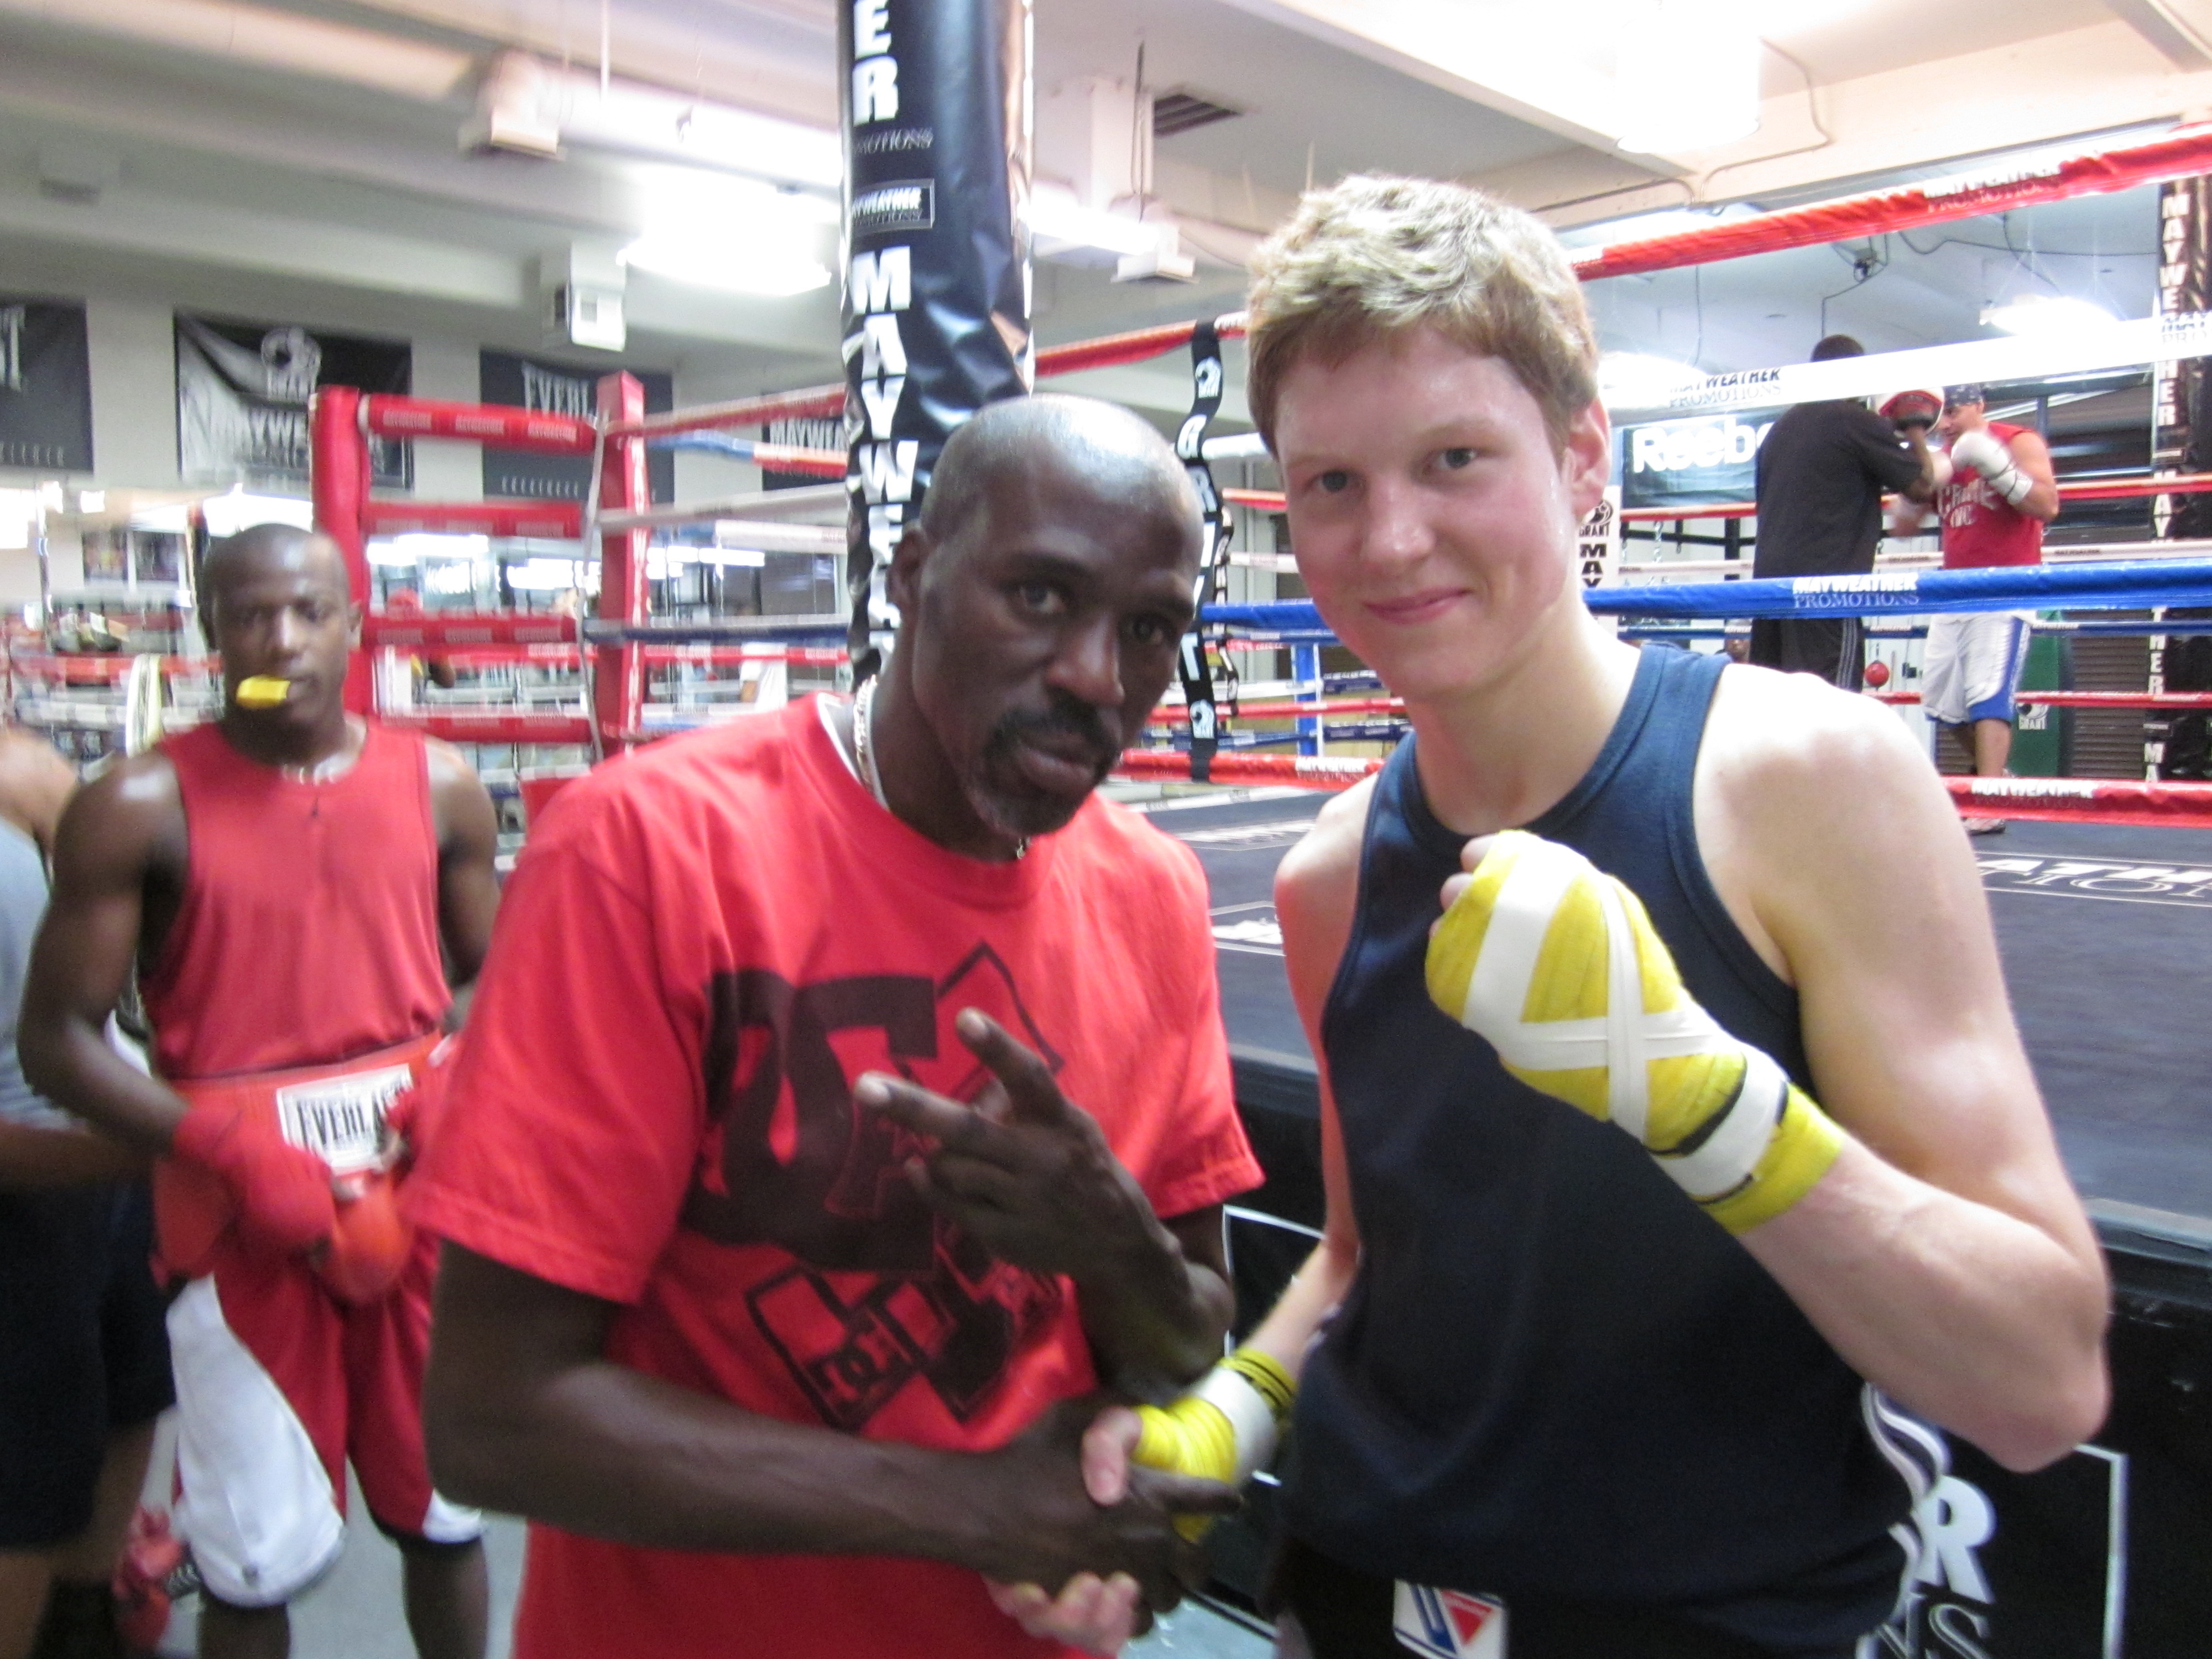 Sparring session at the Mayweather Boxing Club in Las Vegas. With Roger Mayweather, trainer for world champion Floyd Mayweather Jr.